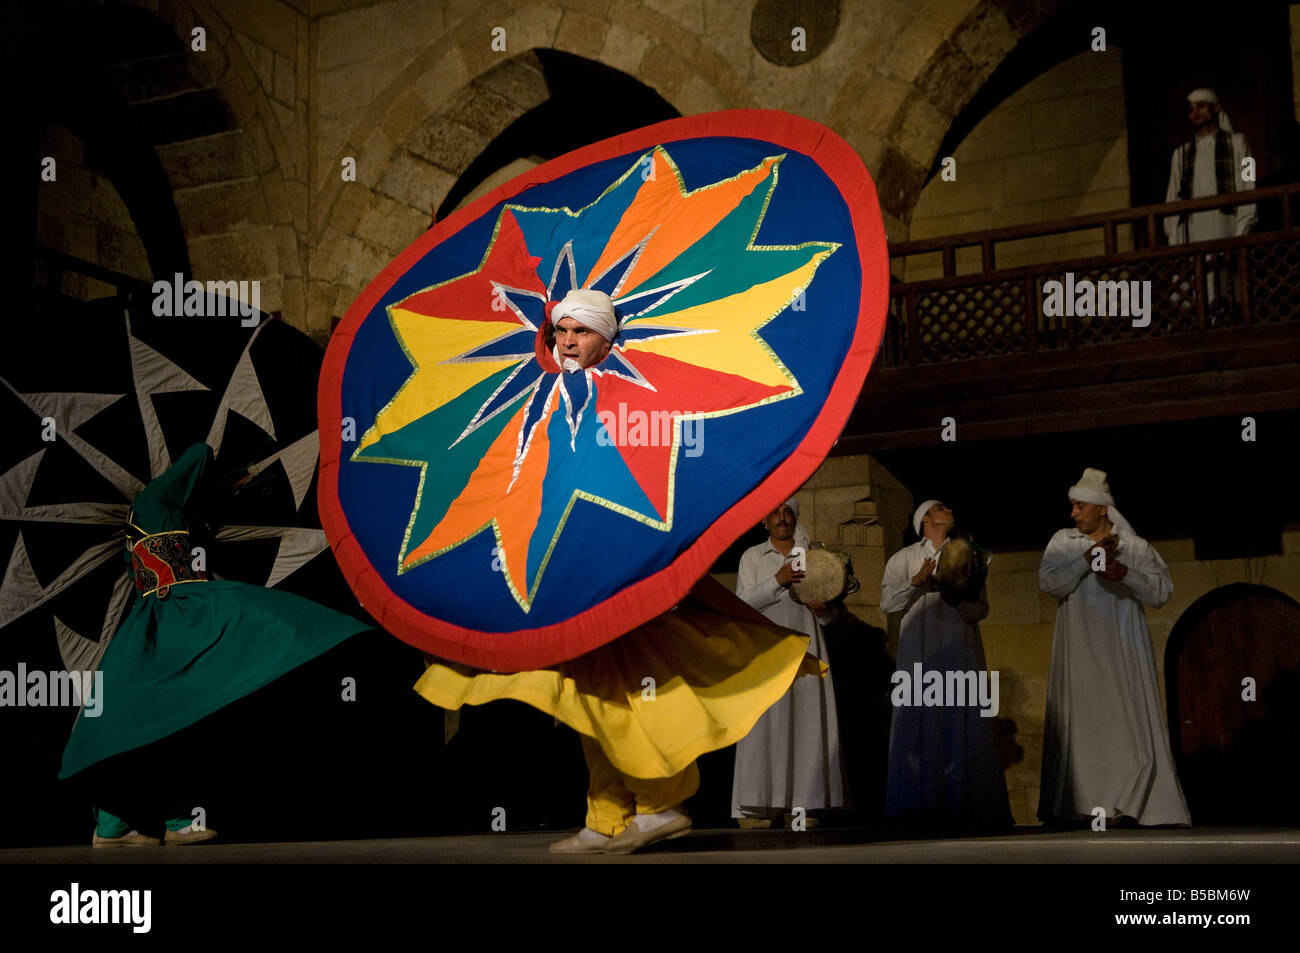 Whirling Dervish or Darvish performance of al tannoura Egyptian heritage dance troupe at the Wekalet el Ghouri Arts Center in Old Cairo Egypt Stock Photo